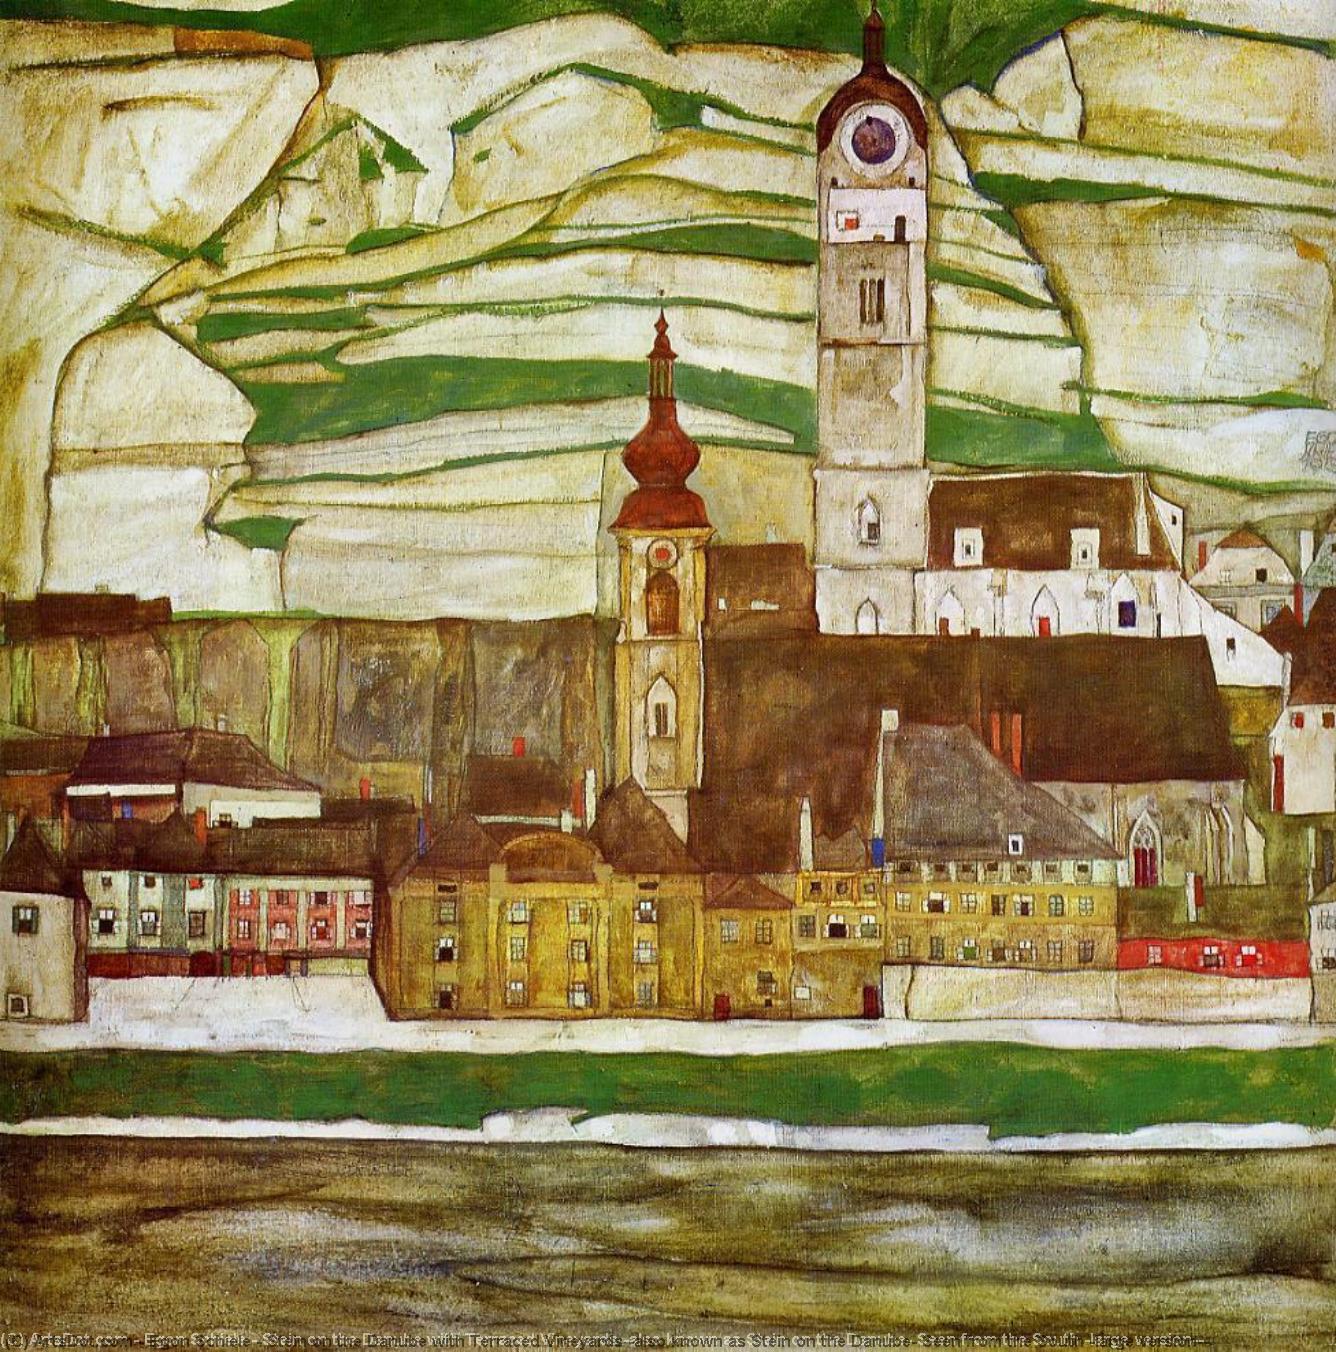 Order Oil Painting Replica Stein on the Danube with Terraced Vineyards (also known as Stein on the Danube, Seen from the South (large version)), 1913 by Egon Schiele (1890-1918, Croatia) | ArtsDot.com